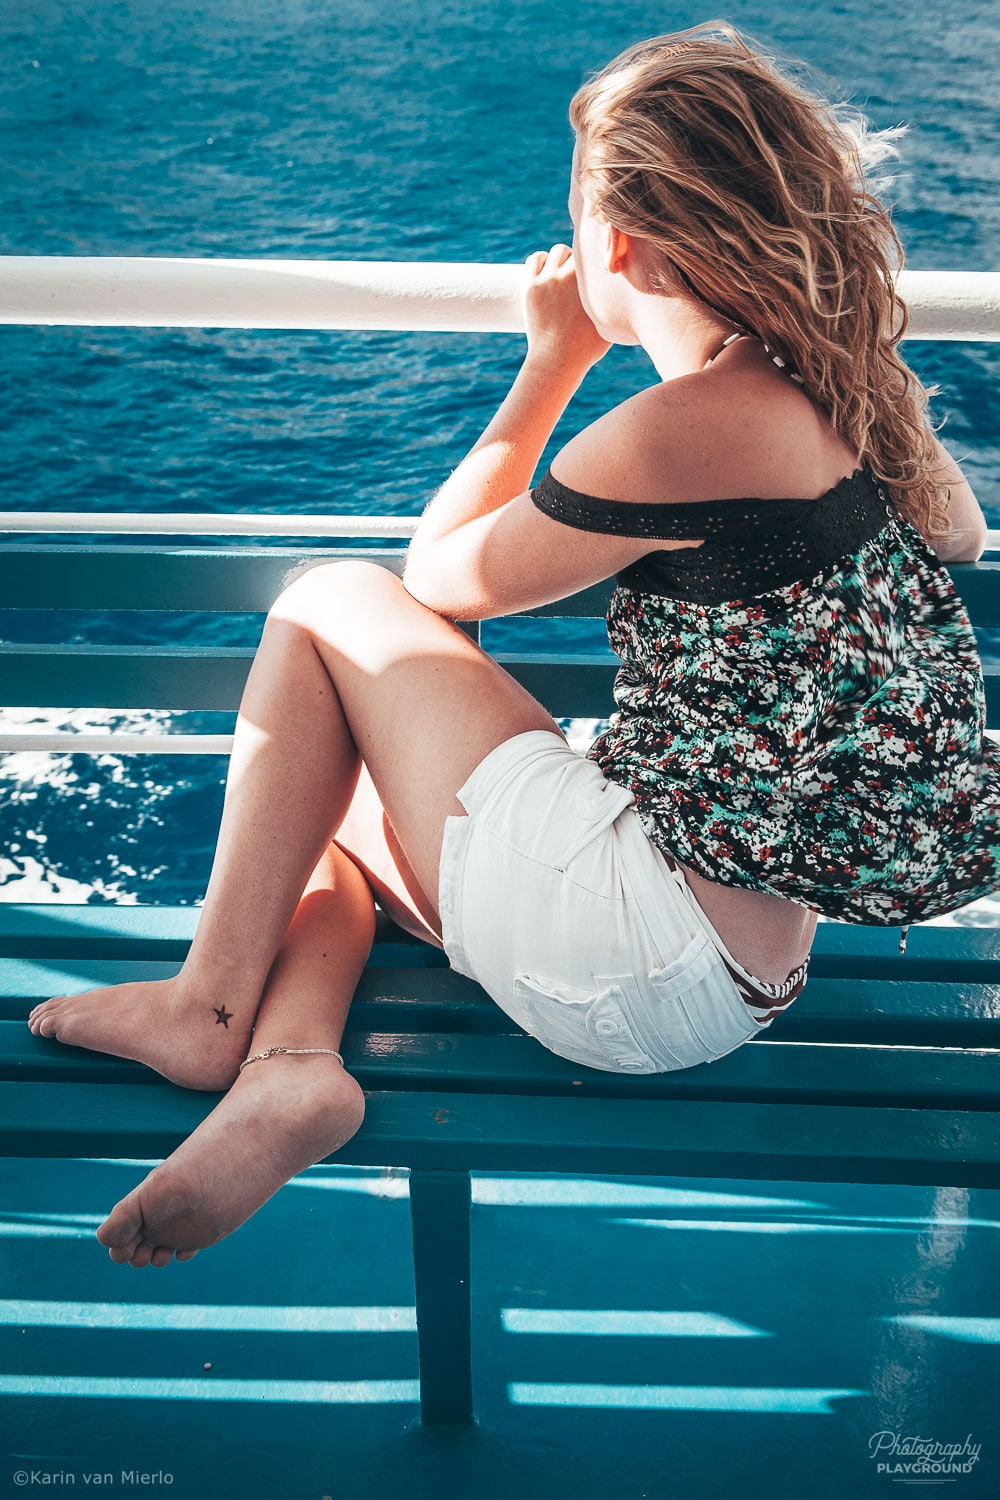 candid photography tips, people photography, candid pics | Photo: Girl on a boat, Crete, Greece ©Karin van Mierlo, Photography Playground